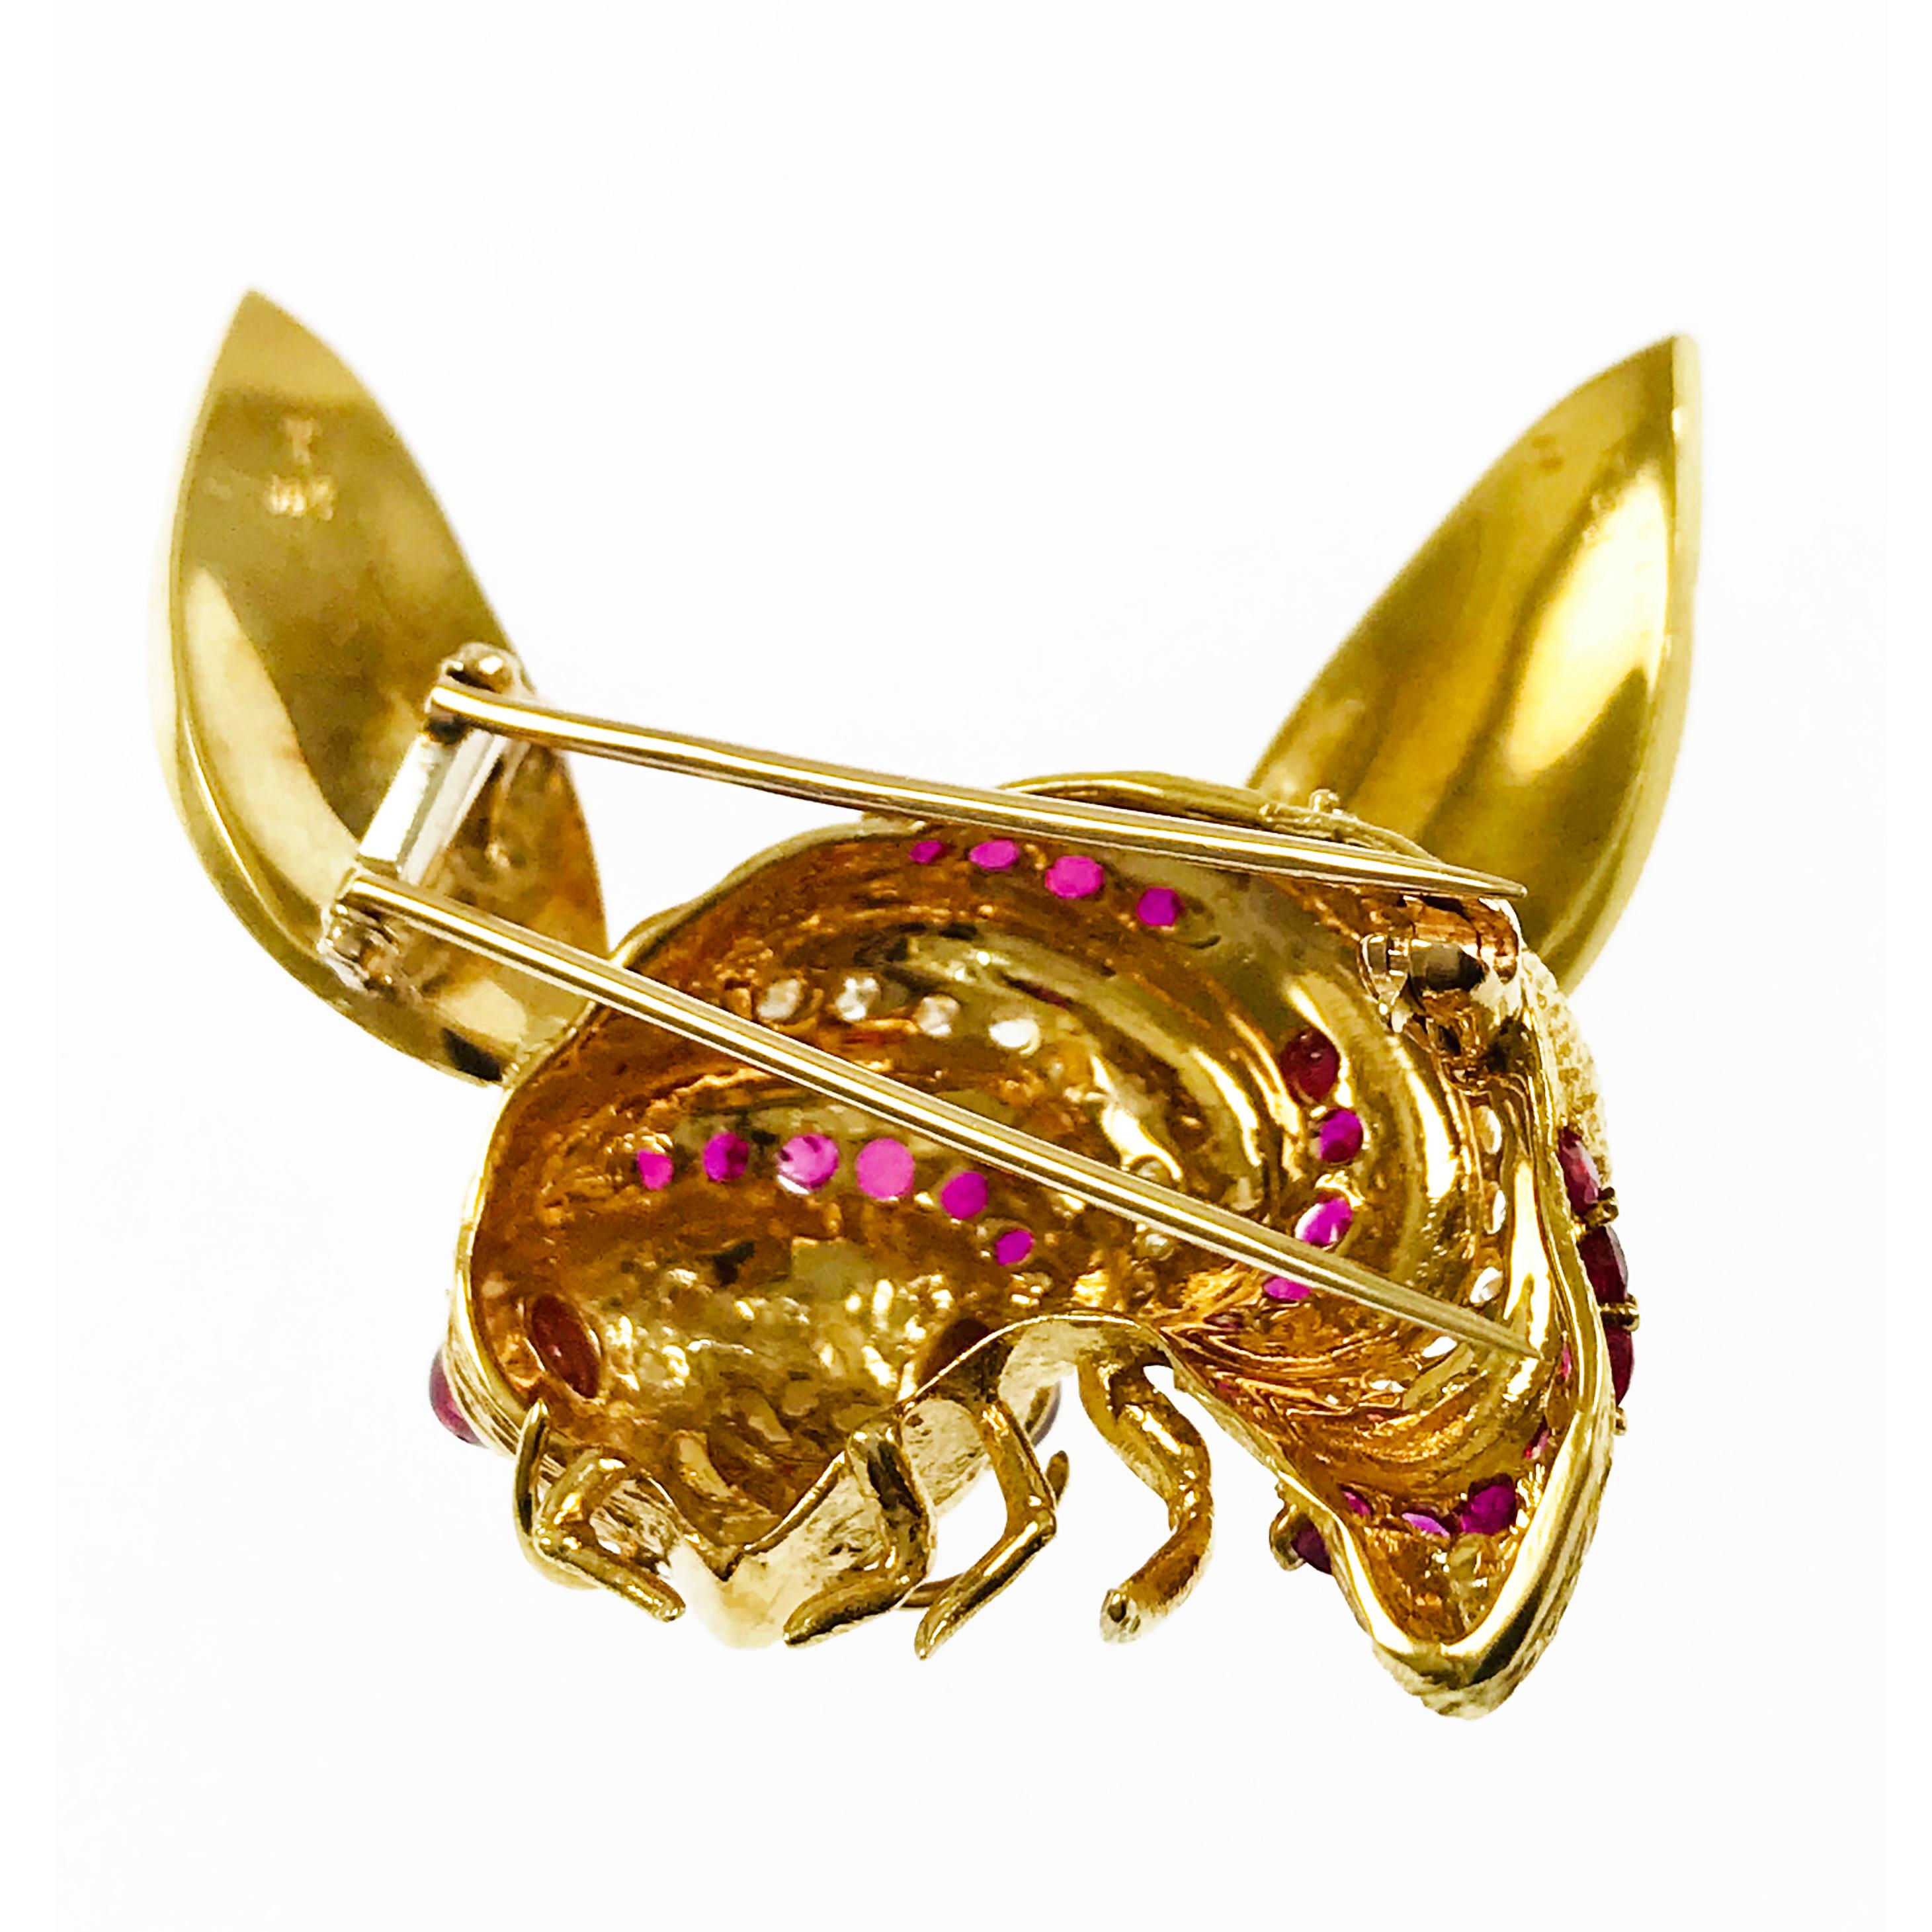 18k Yellow Gold Van Cleef & Arpels Diamond Ruby Bee Brooch. A stunning piece of jewelry that would make a wonderful addition to any fine jewelry collection. There is meticulous detail in the body and in the gorgeous outspread wings. Stamped on the